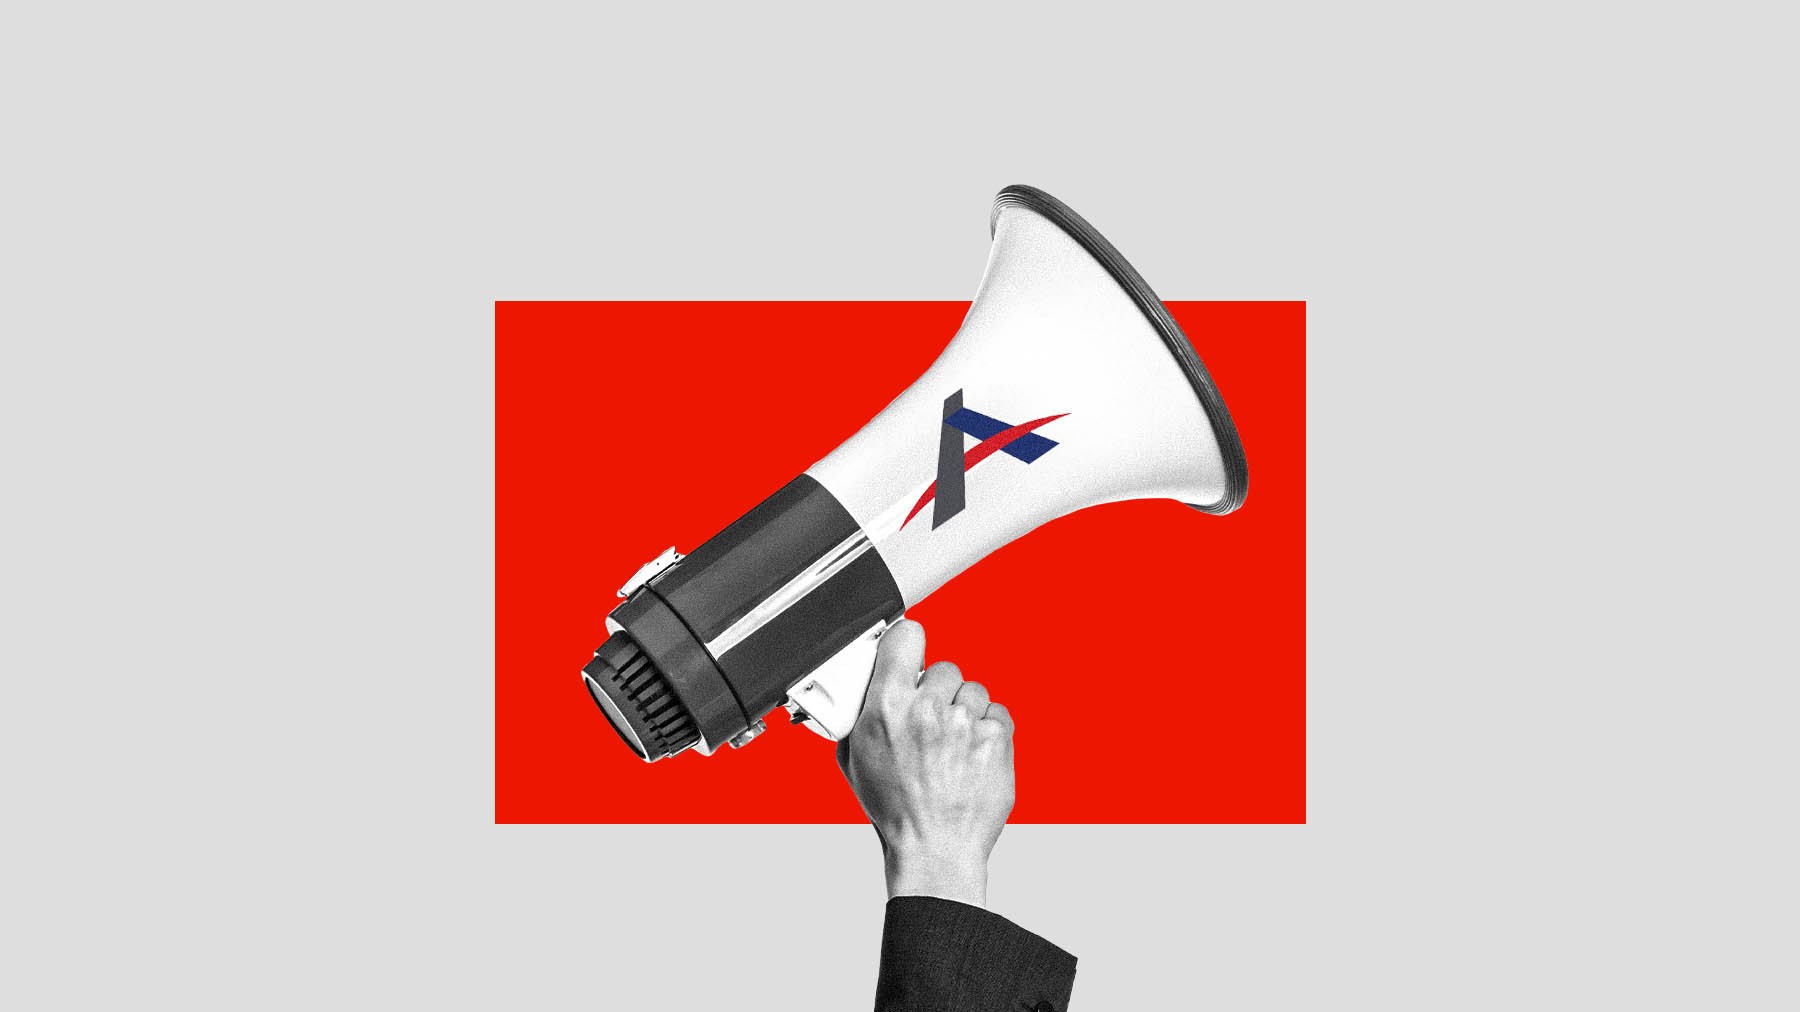 A hand gripping a megaphone with the ADF logo, positioned above a vibrant red square background.